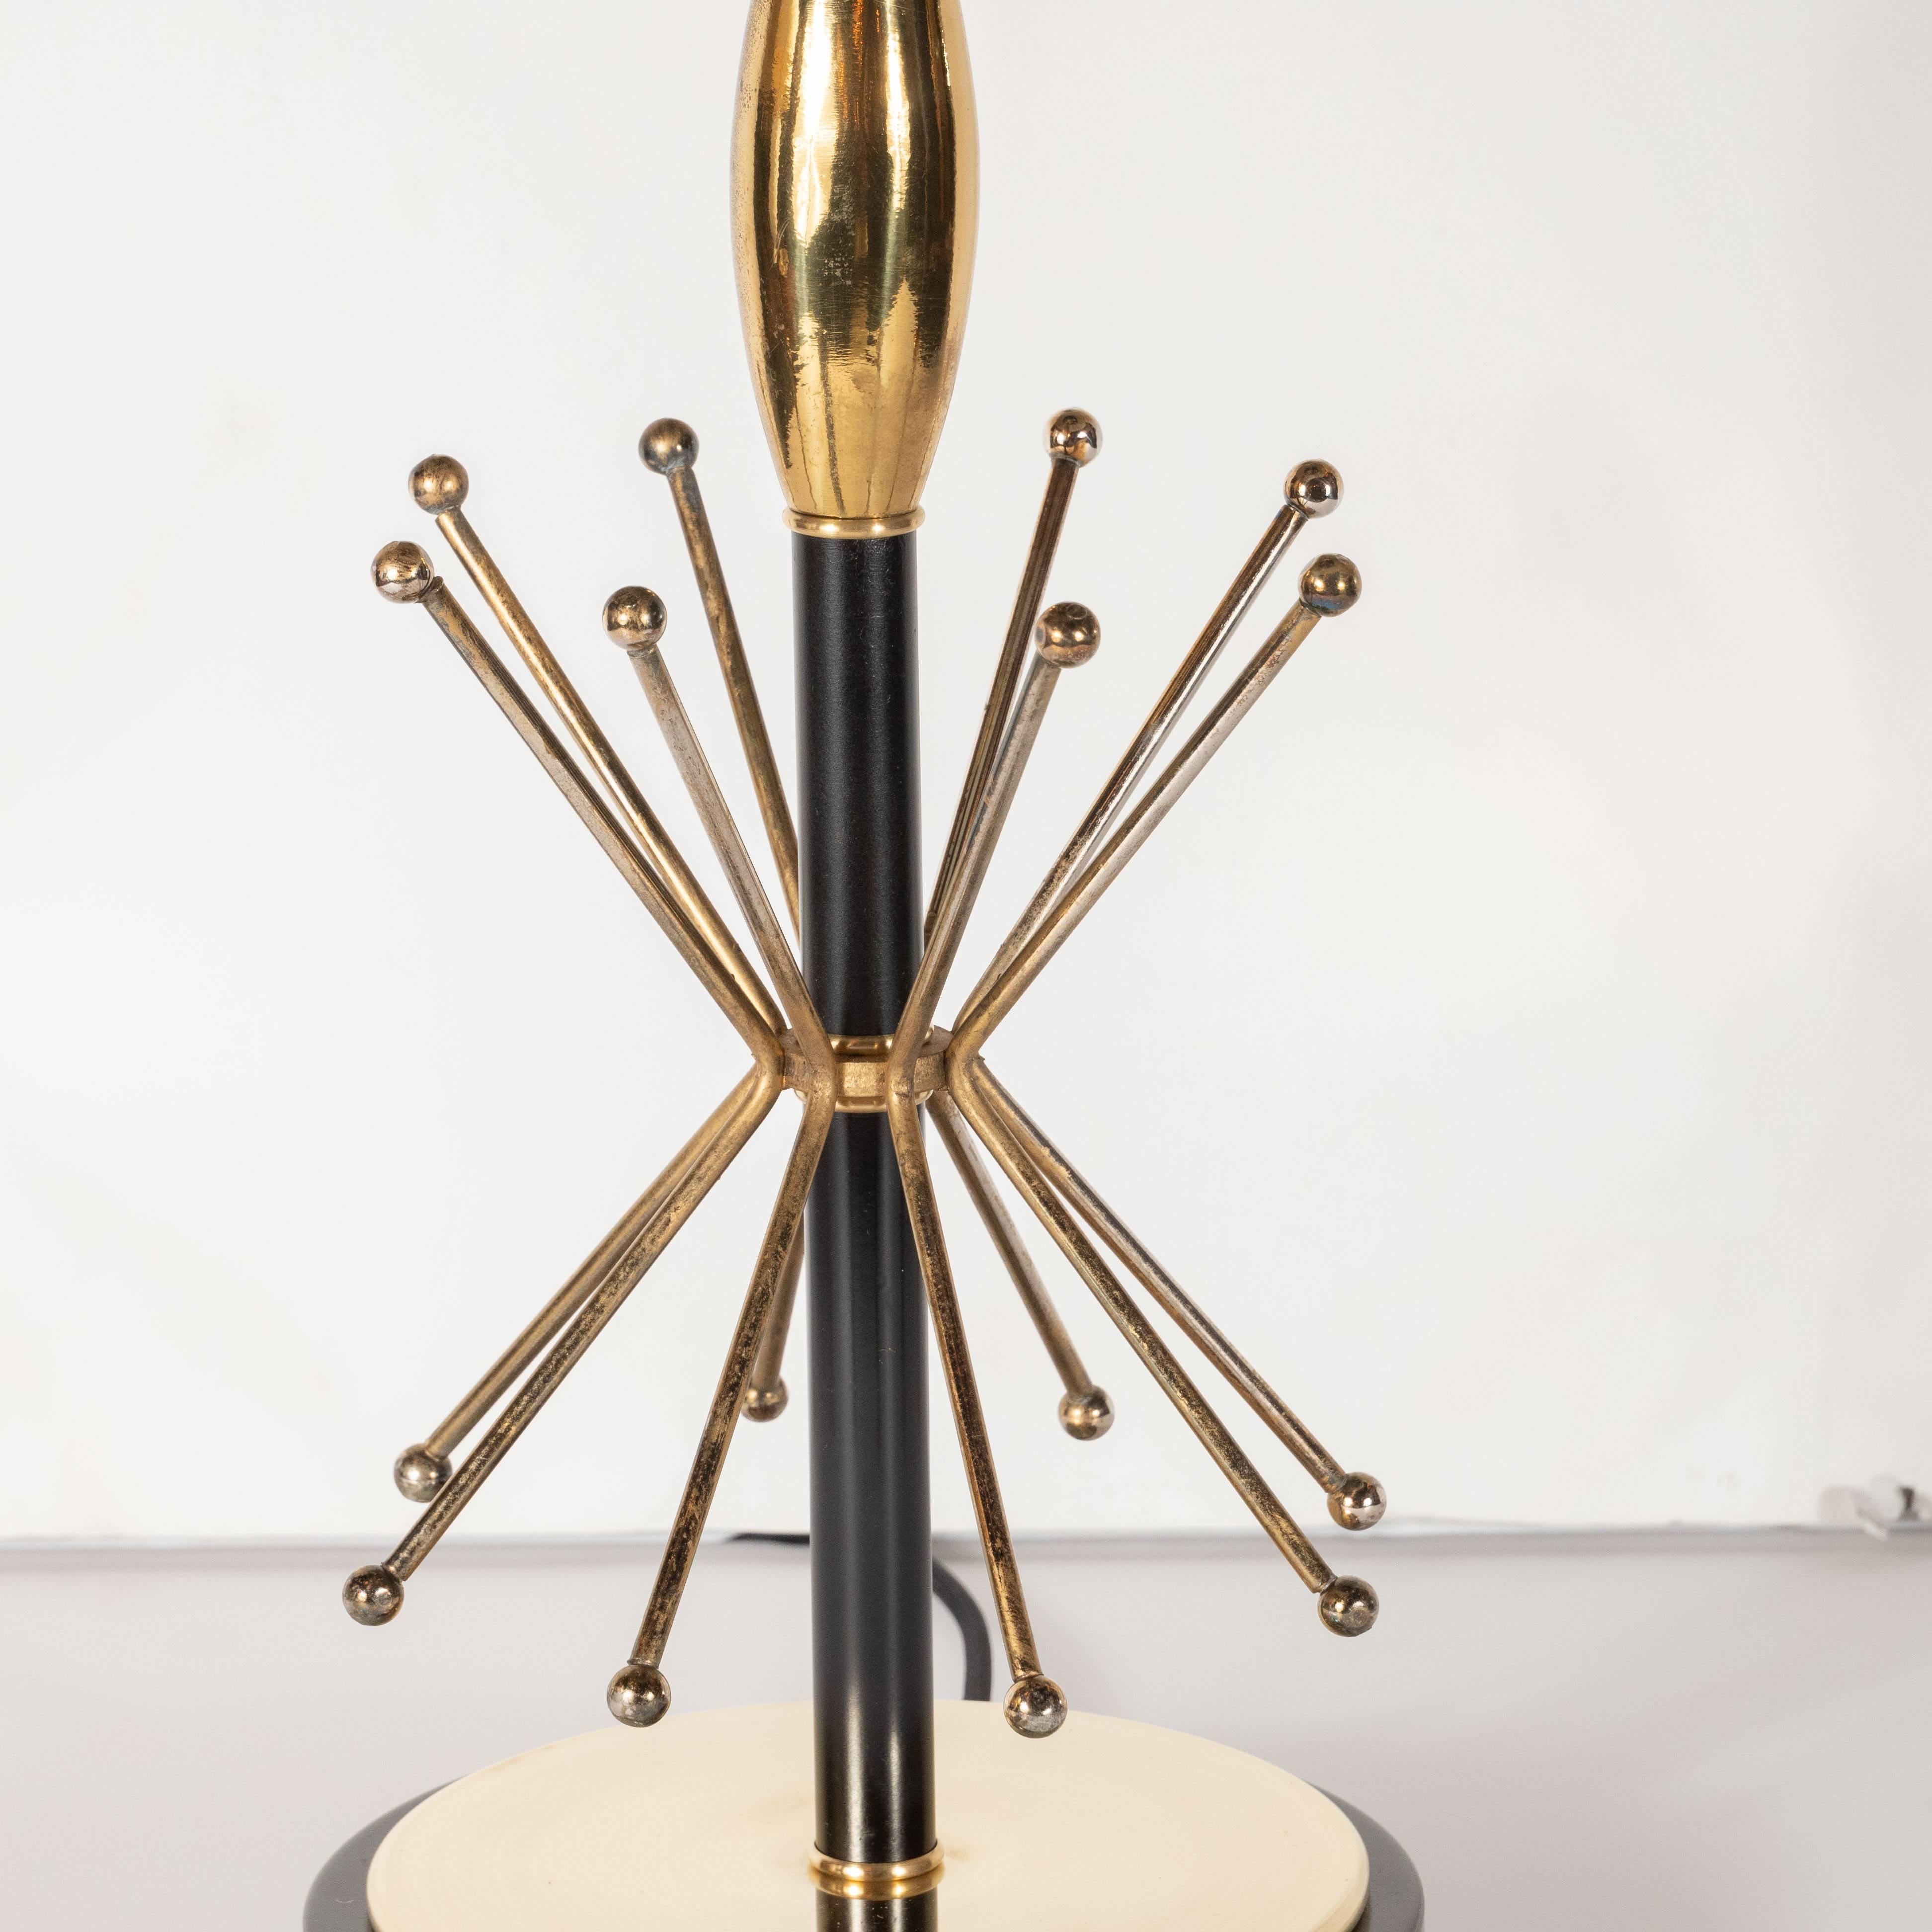 American Pair of Mid-Century Modern Atomic Age Brass and Black Enamel Table Lamps